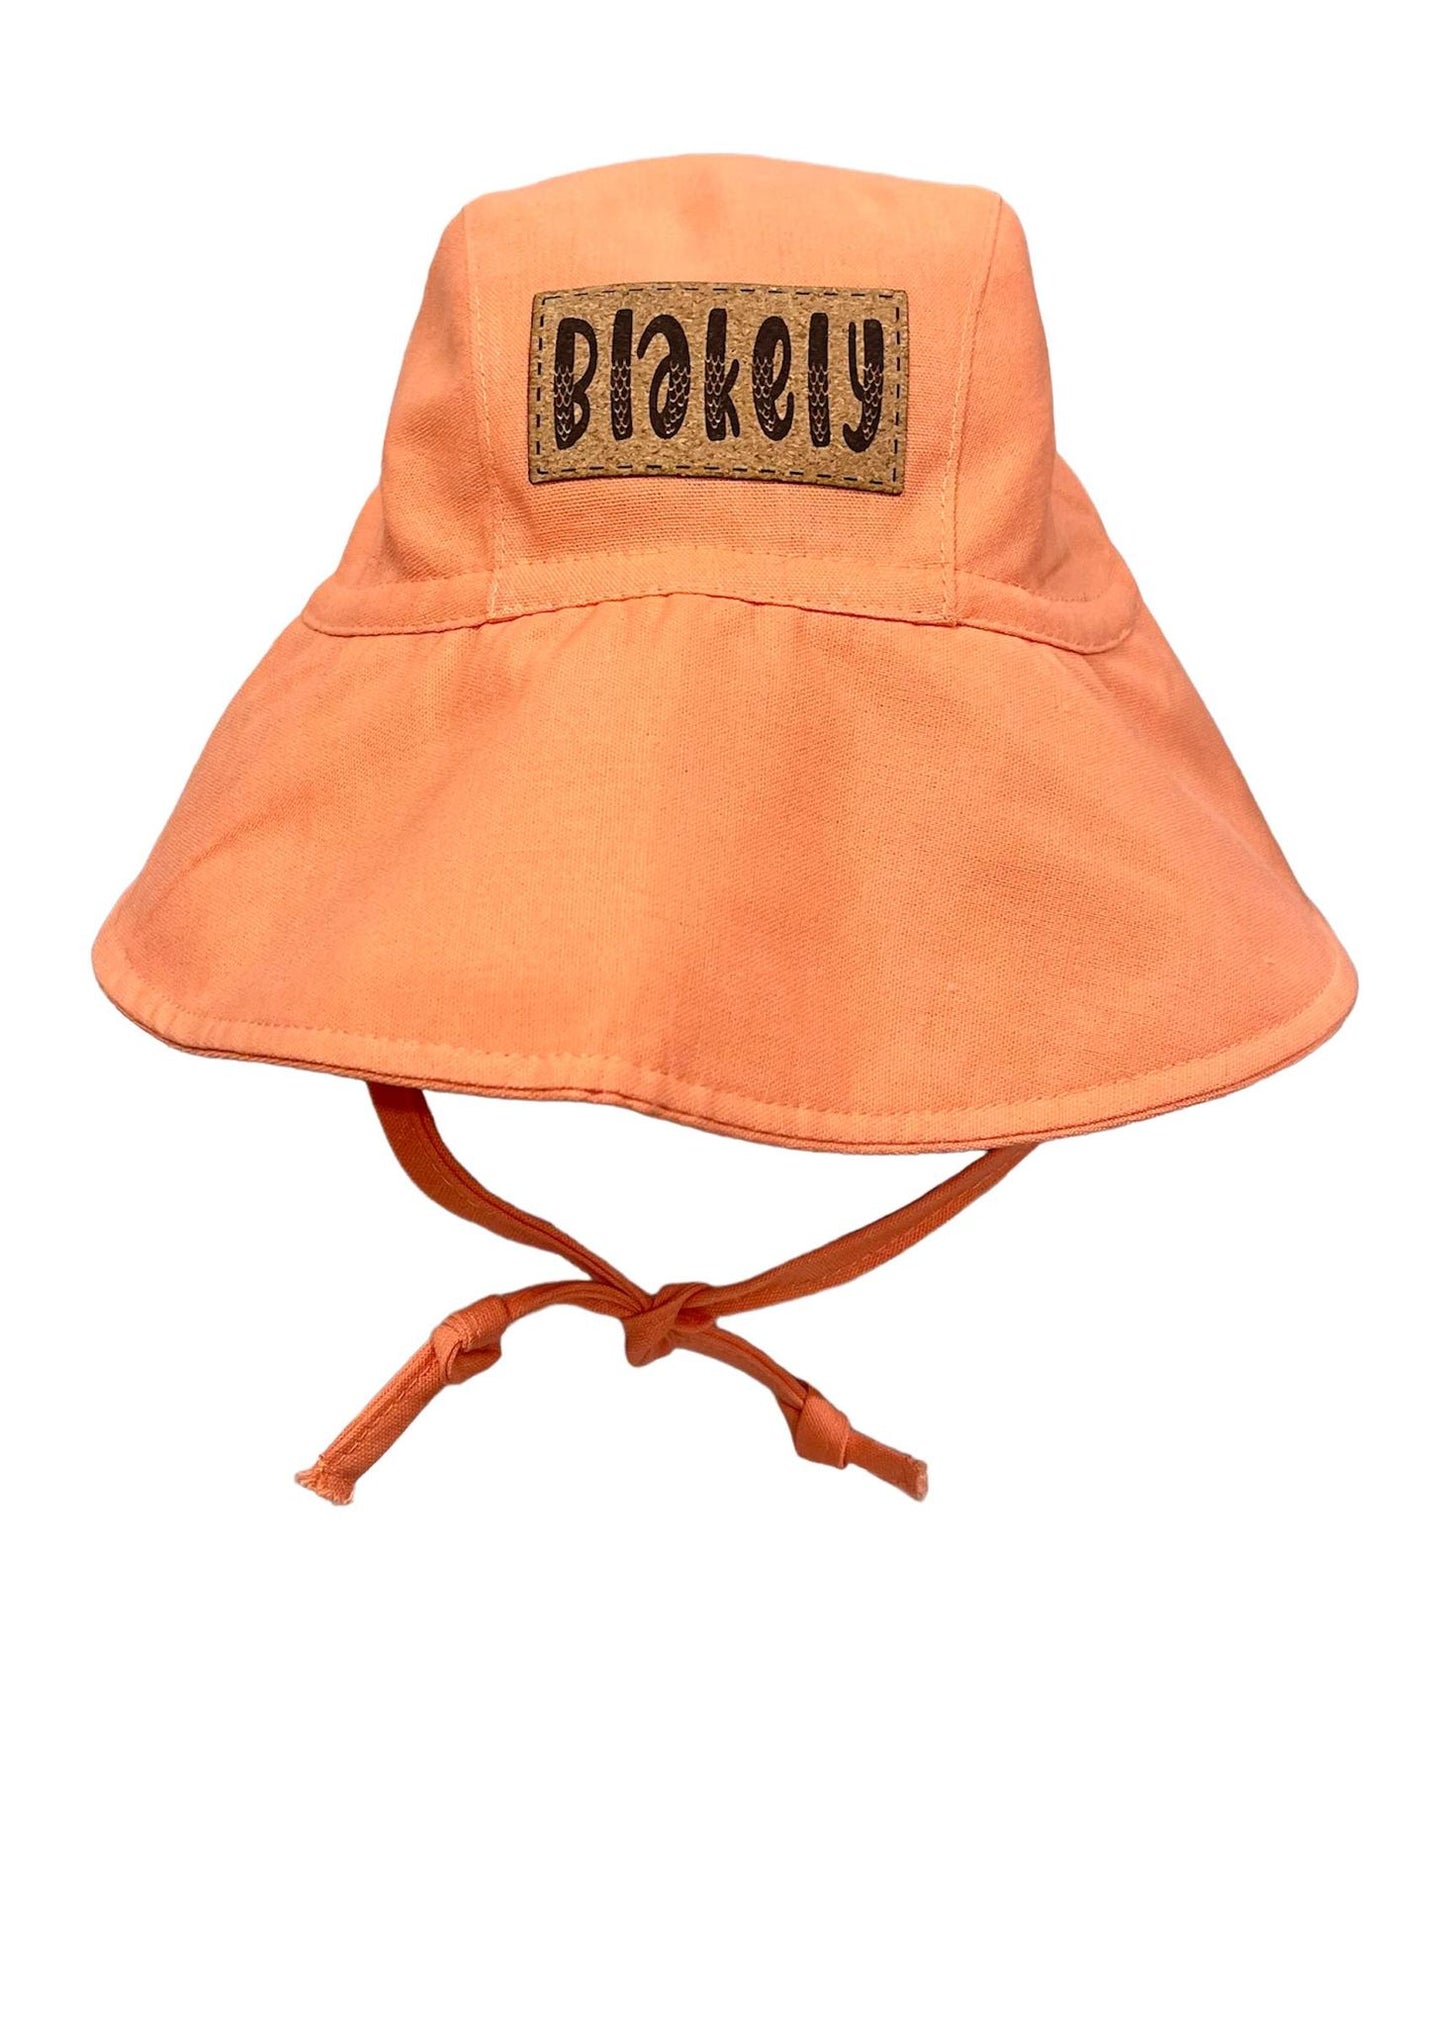 Baby, Toddler, Kids Size Big Brim, Pleated Bucket Hats,  Girls Personalized Sun Hats